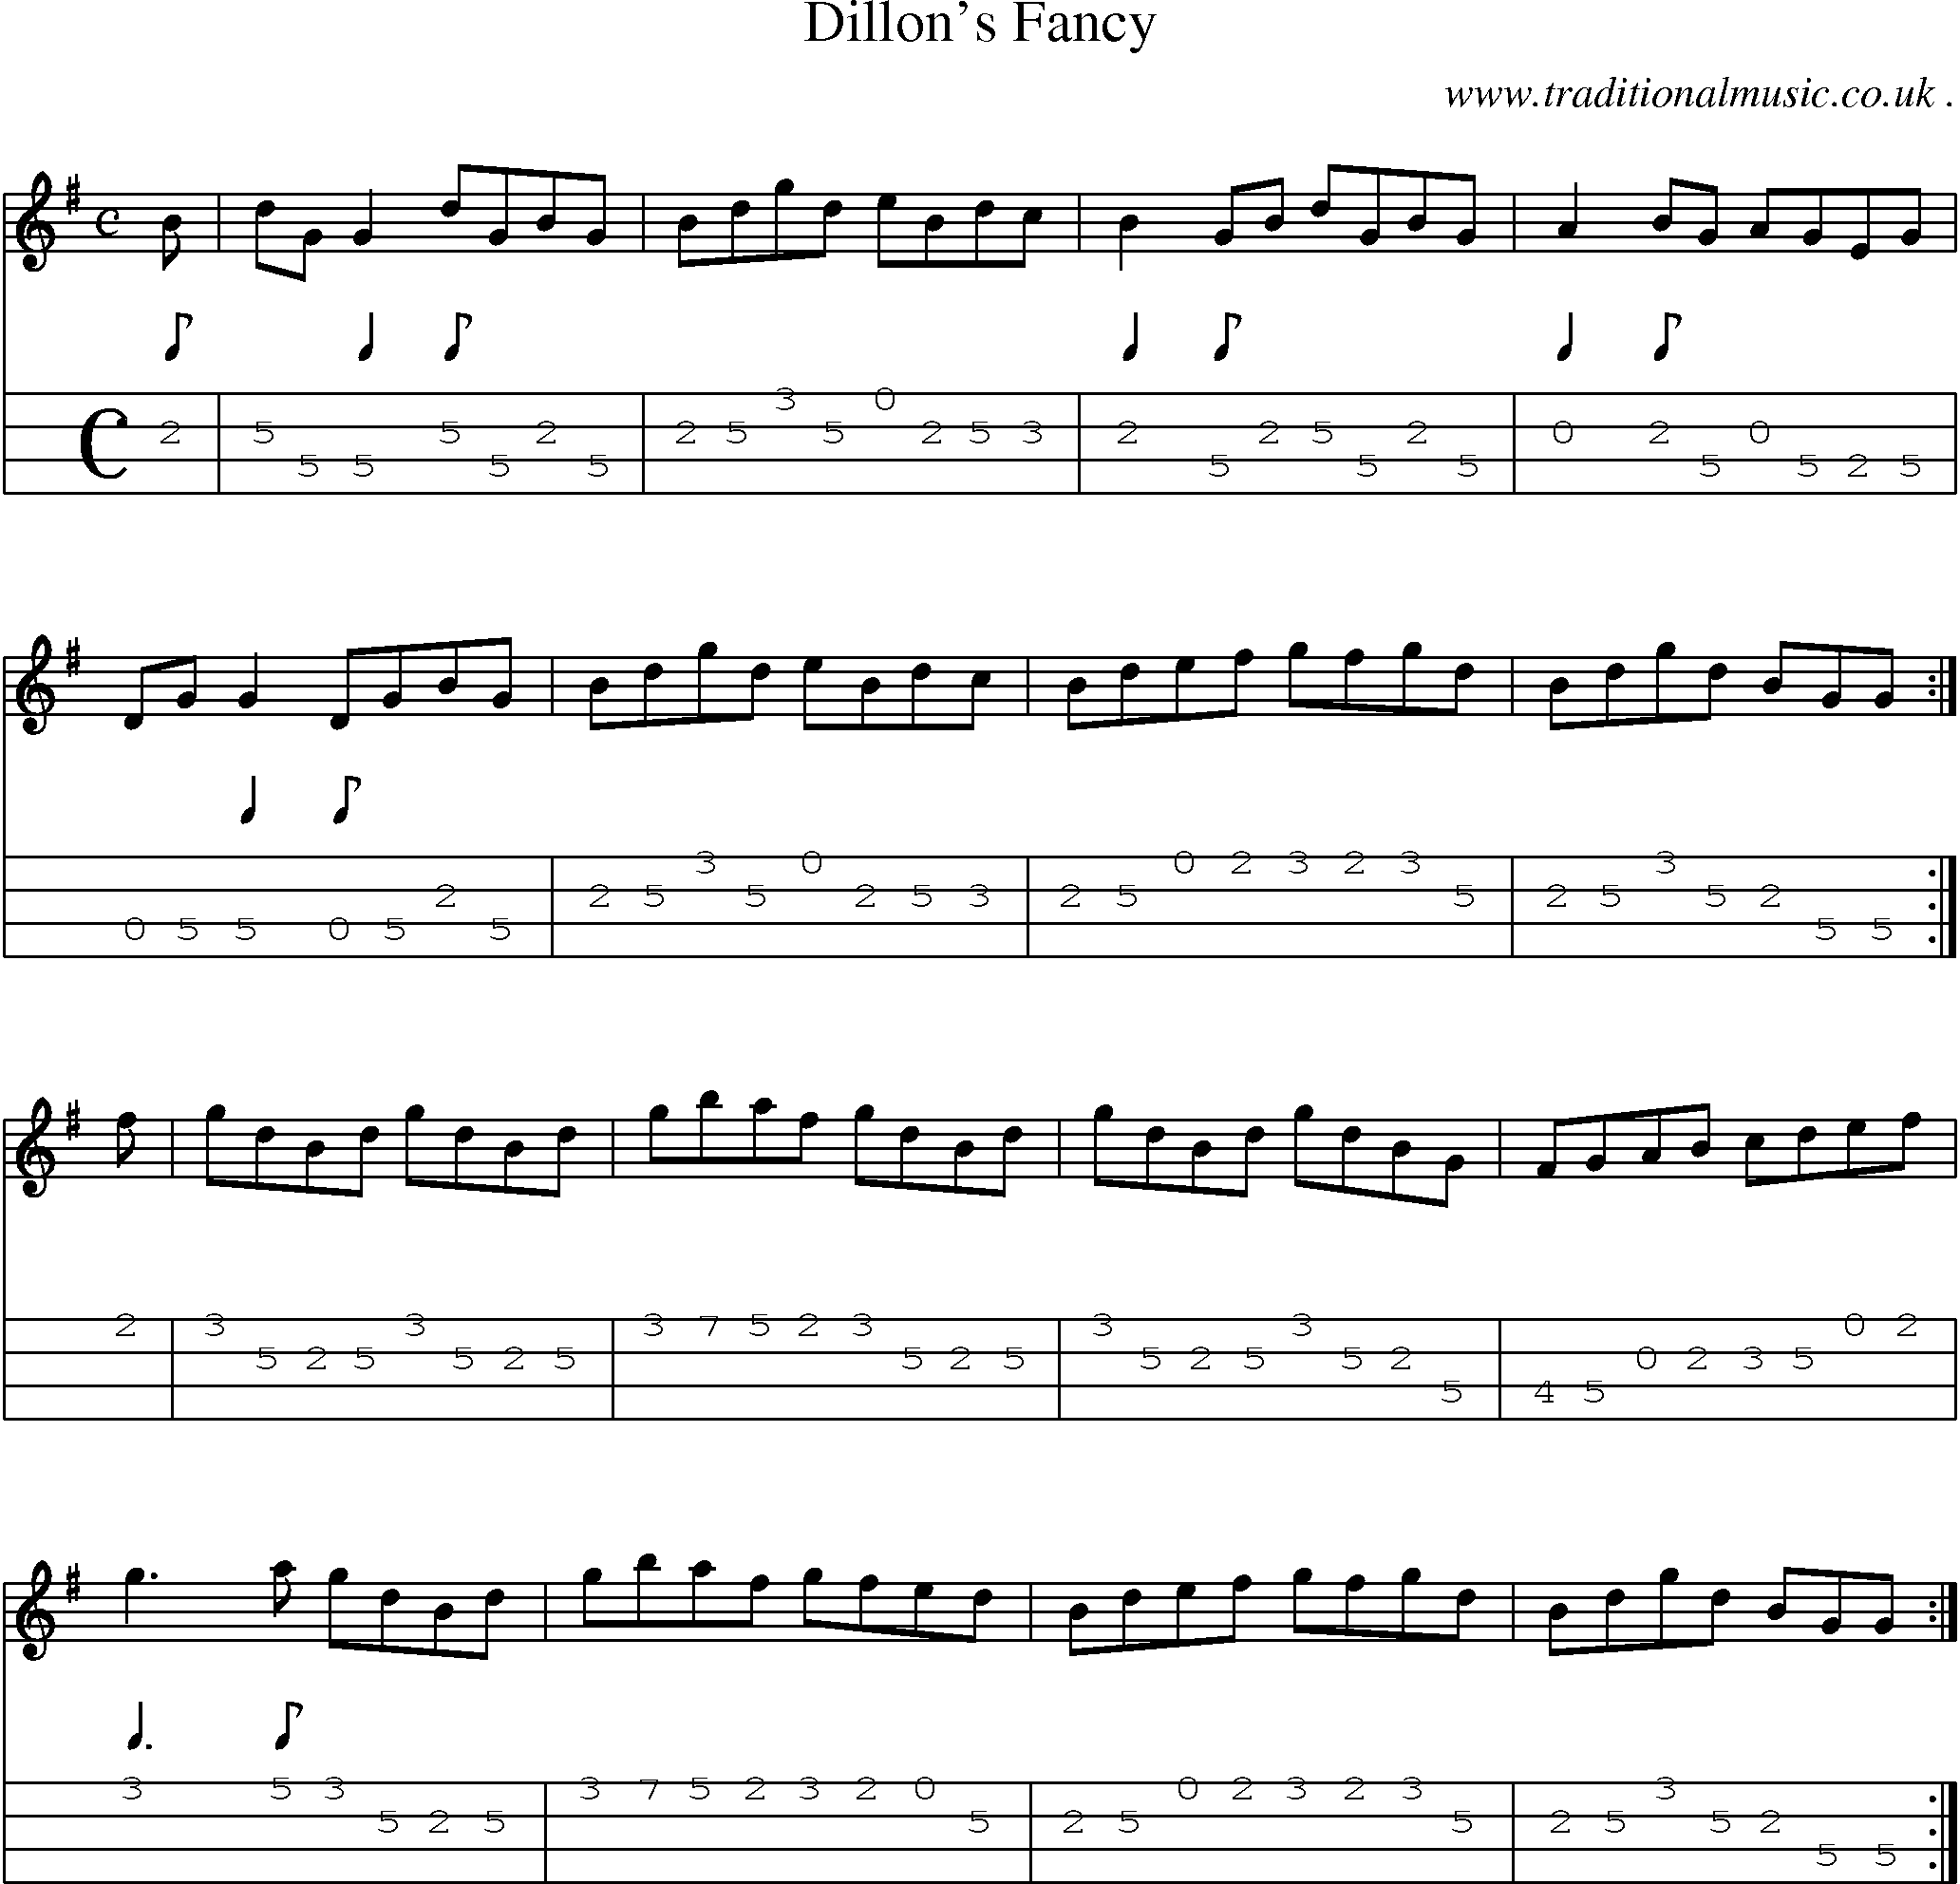 Sheet-Music and Mandolin Tabs for Dillons Fancy